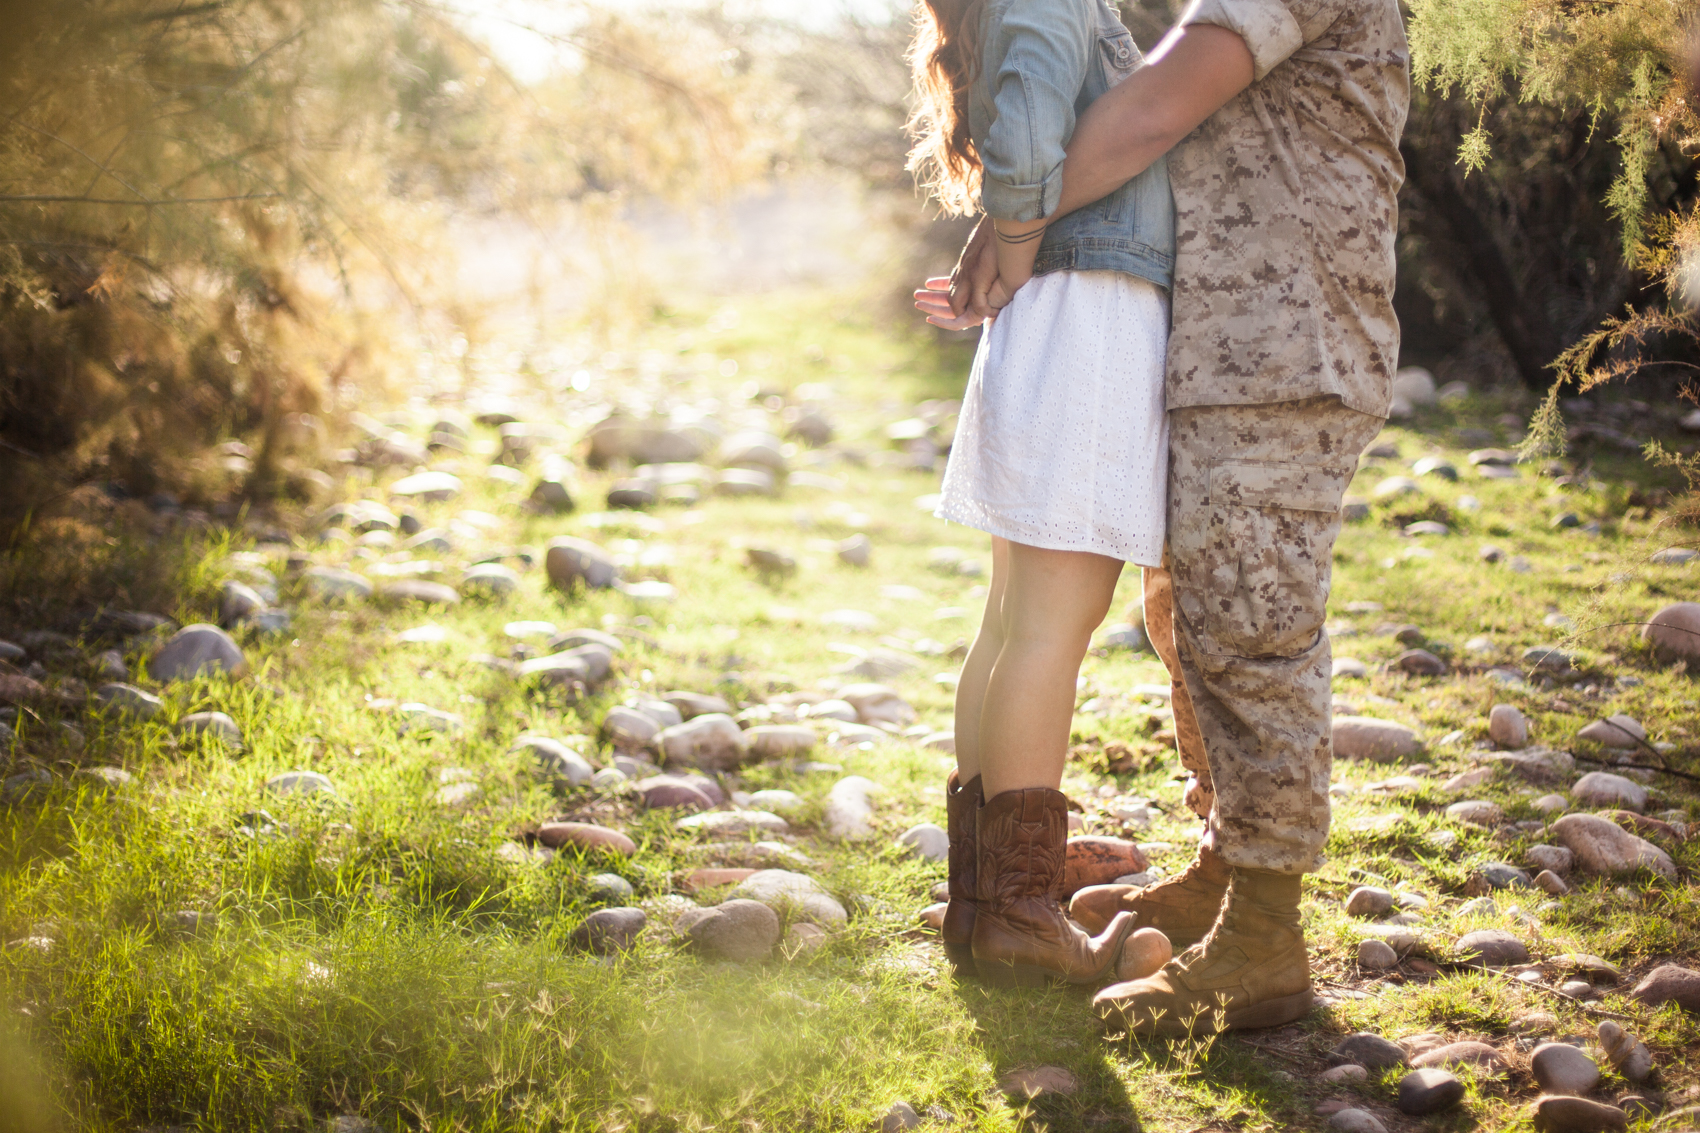 marine wrapping his arms around girl wearing cowgirl boots